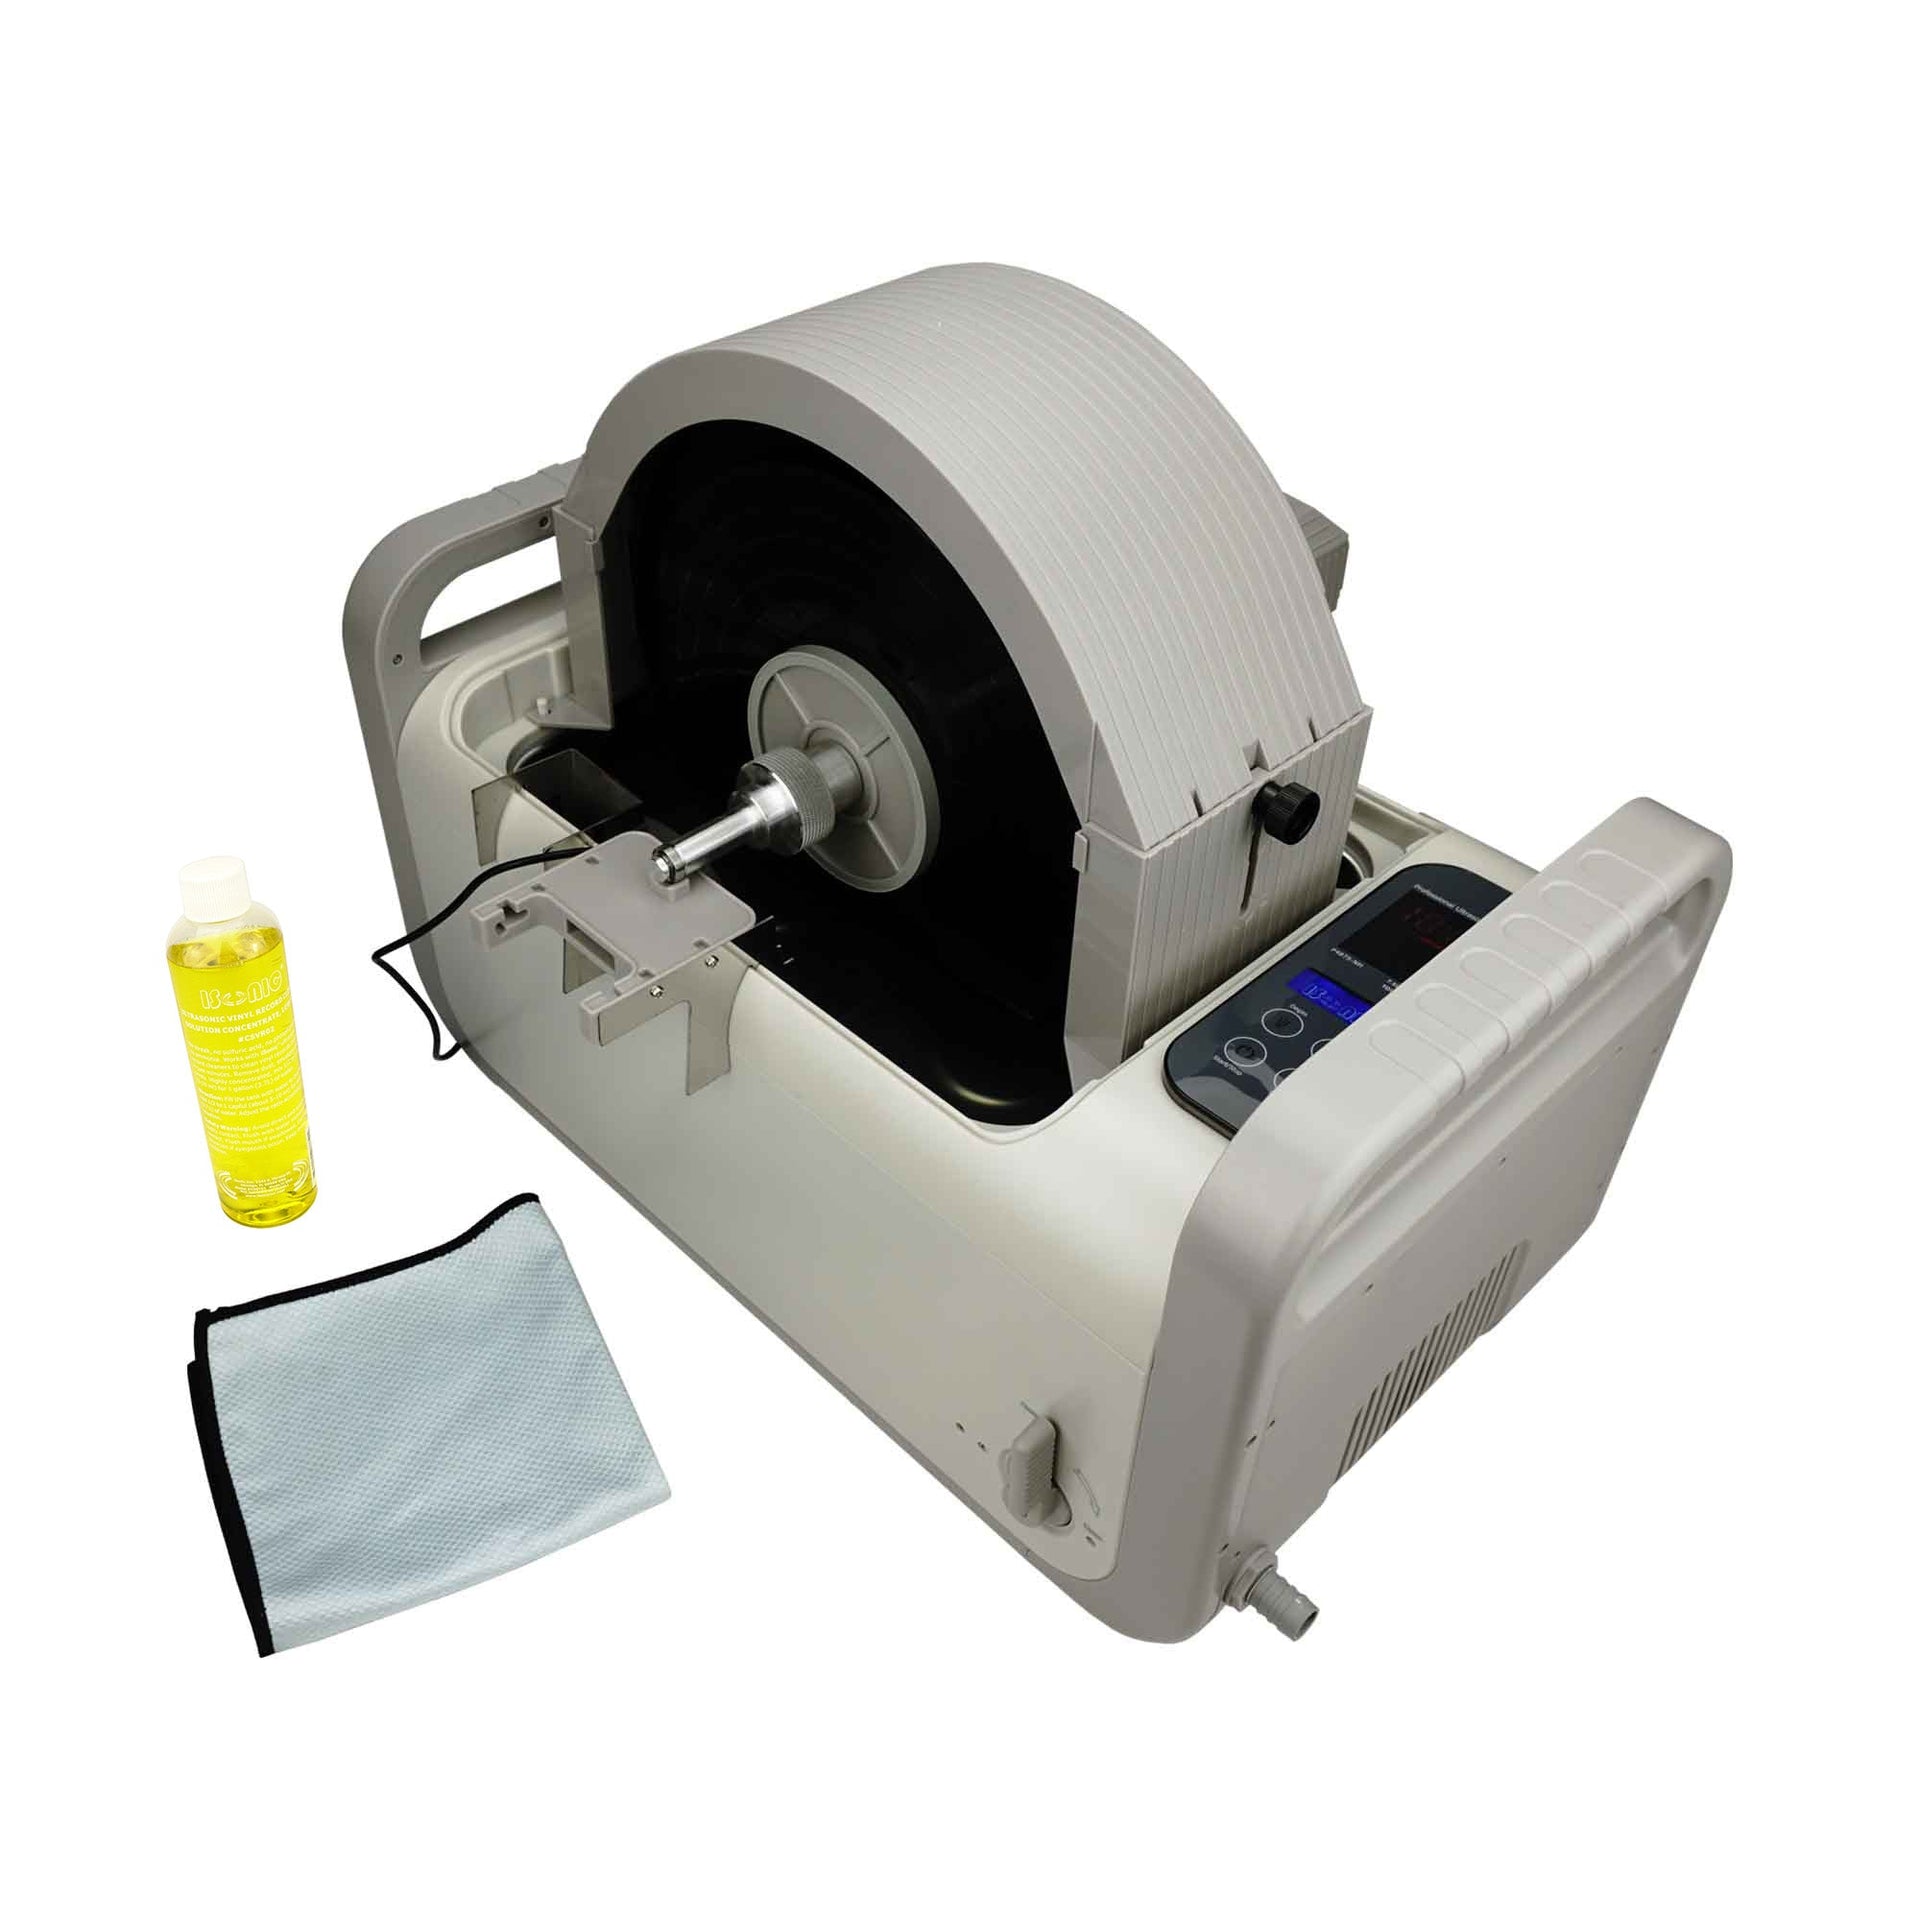 P4875II+MVR5 | iSonic® Ultrasonic Vinyl Record Cleaner for 5-LPs, 2Gal/7.5L  with heaters